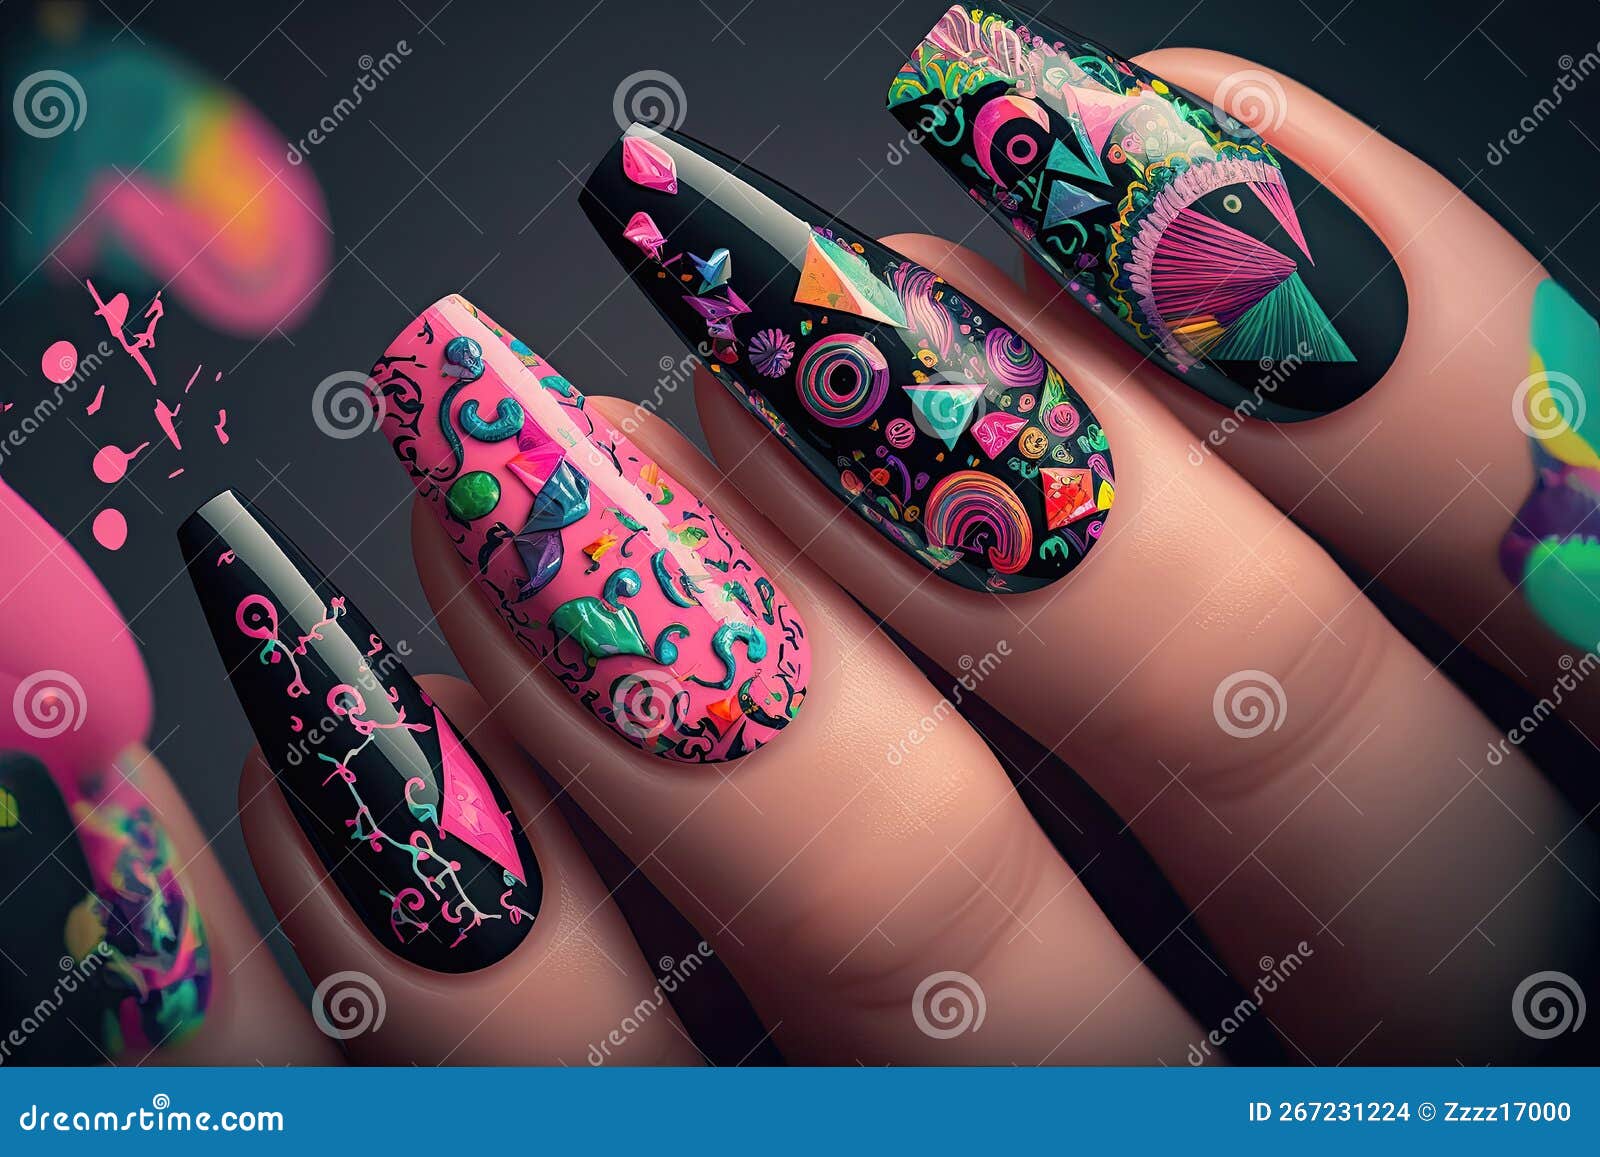 5 Colorful Nail Designs for Summer - Paisley & Sparrow